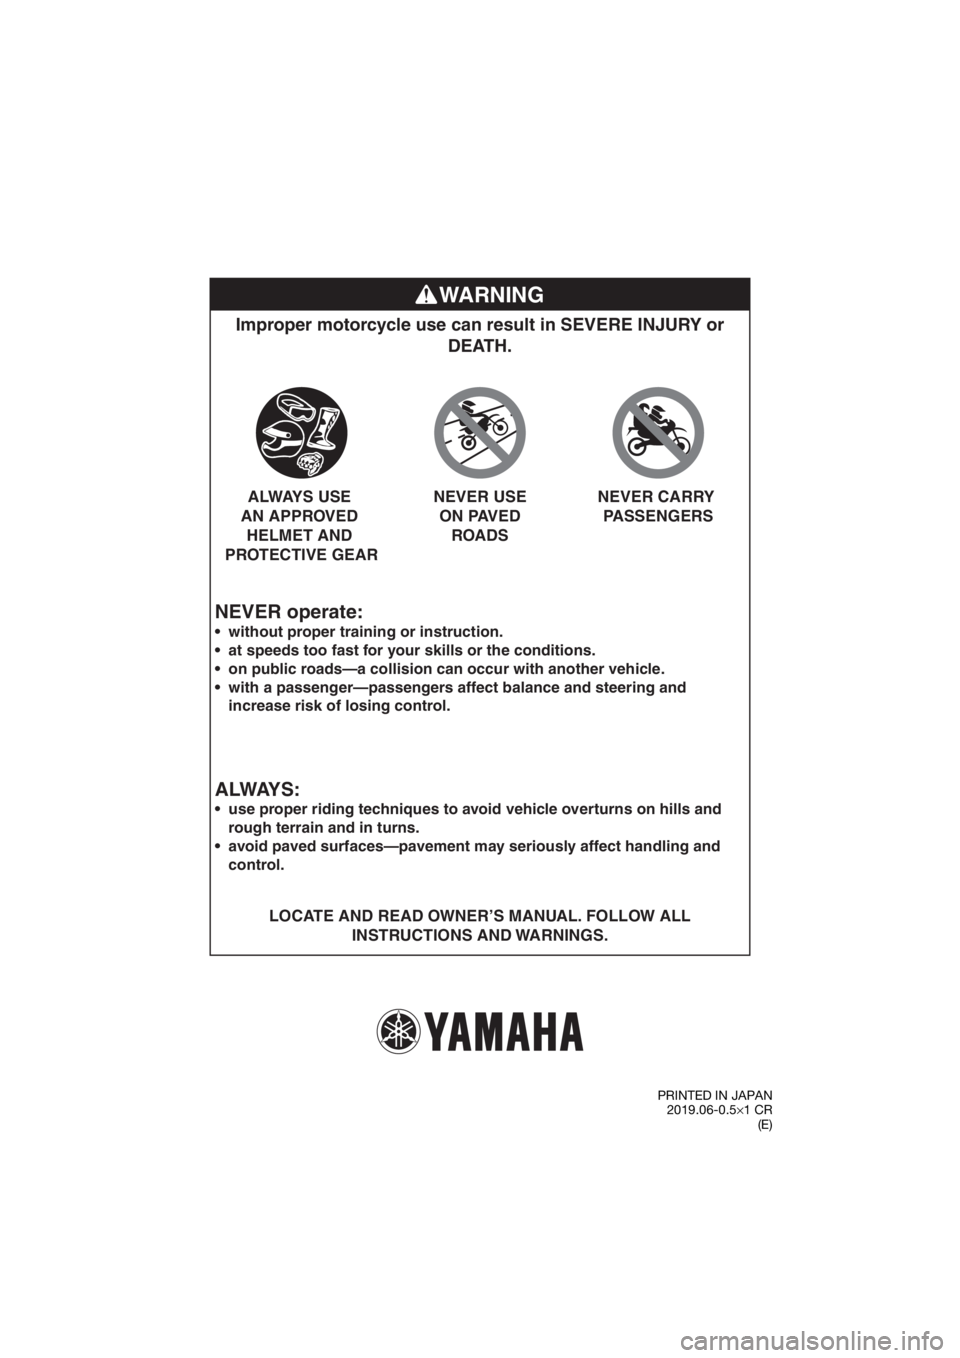 YAMAHA TT-R110E 2020 Manual Online WARNING
NEVER operate:
Improper motorcycle use can result in SEVERE INJURY or DEATH.
LOCATE AND READ OWNER’S MANUAL. FOLLOW ALL 
INSTRUCTIONS AND WARNINGS.



without proper training or instruction.